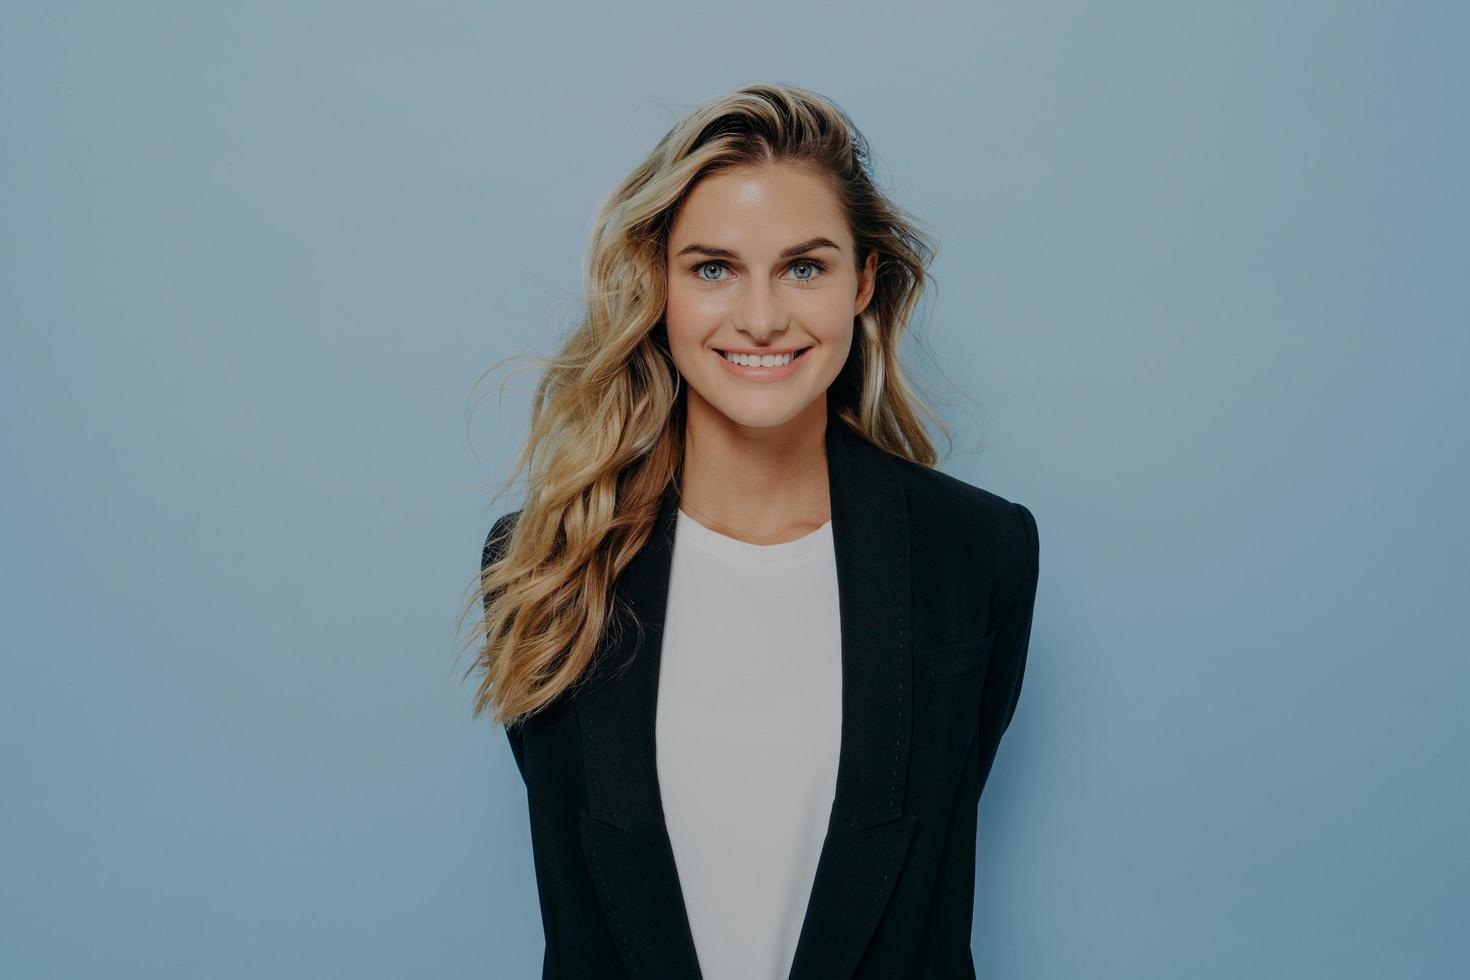 Vivacious blond woman in stylish blazer with happy beaming smile standing with hands behind her back photo